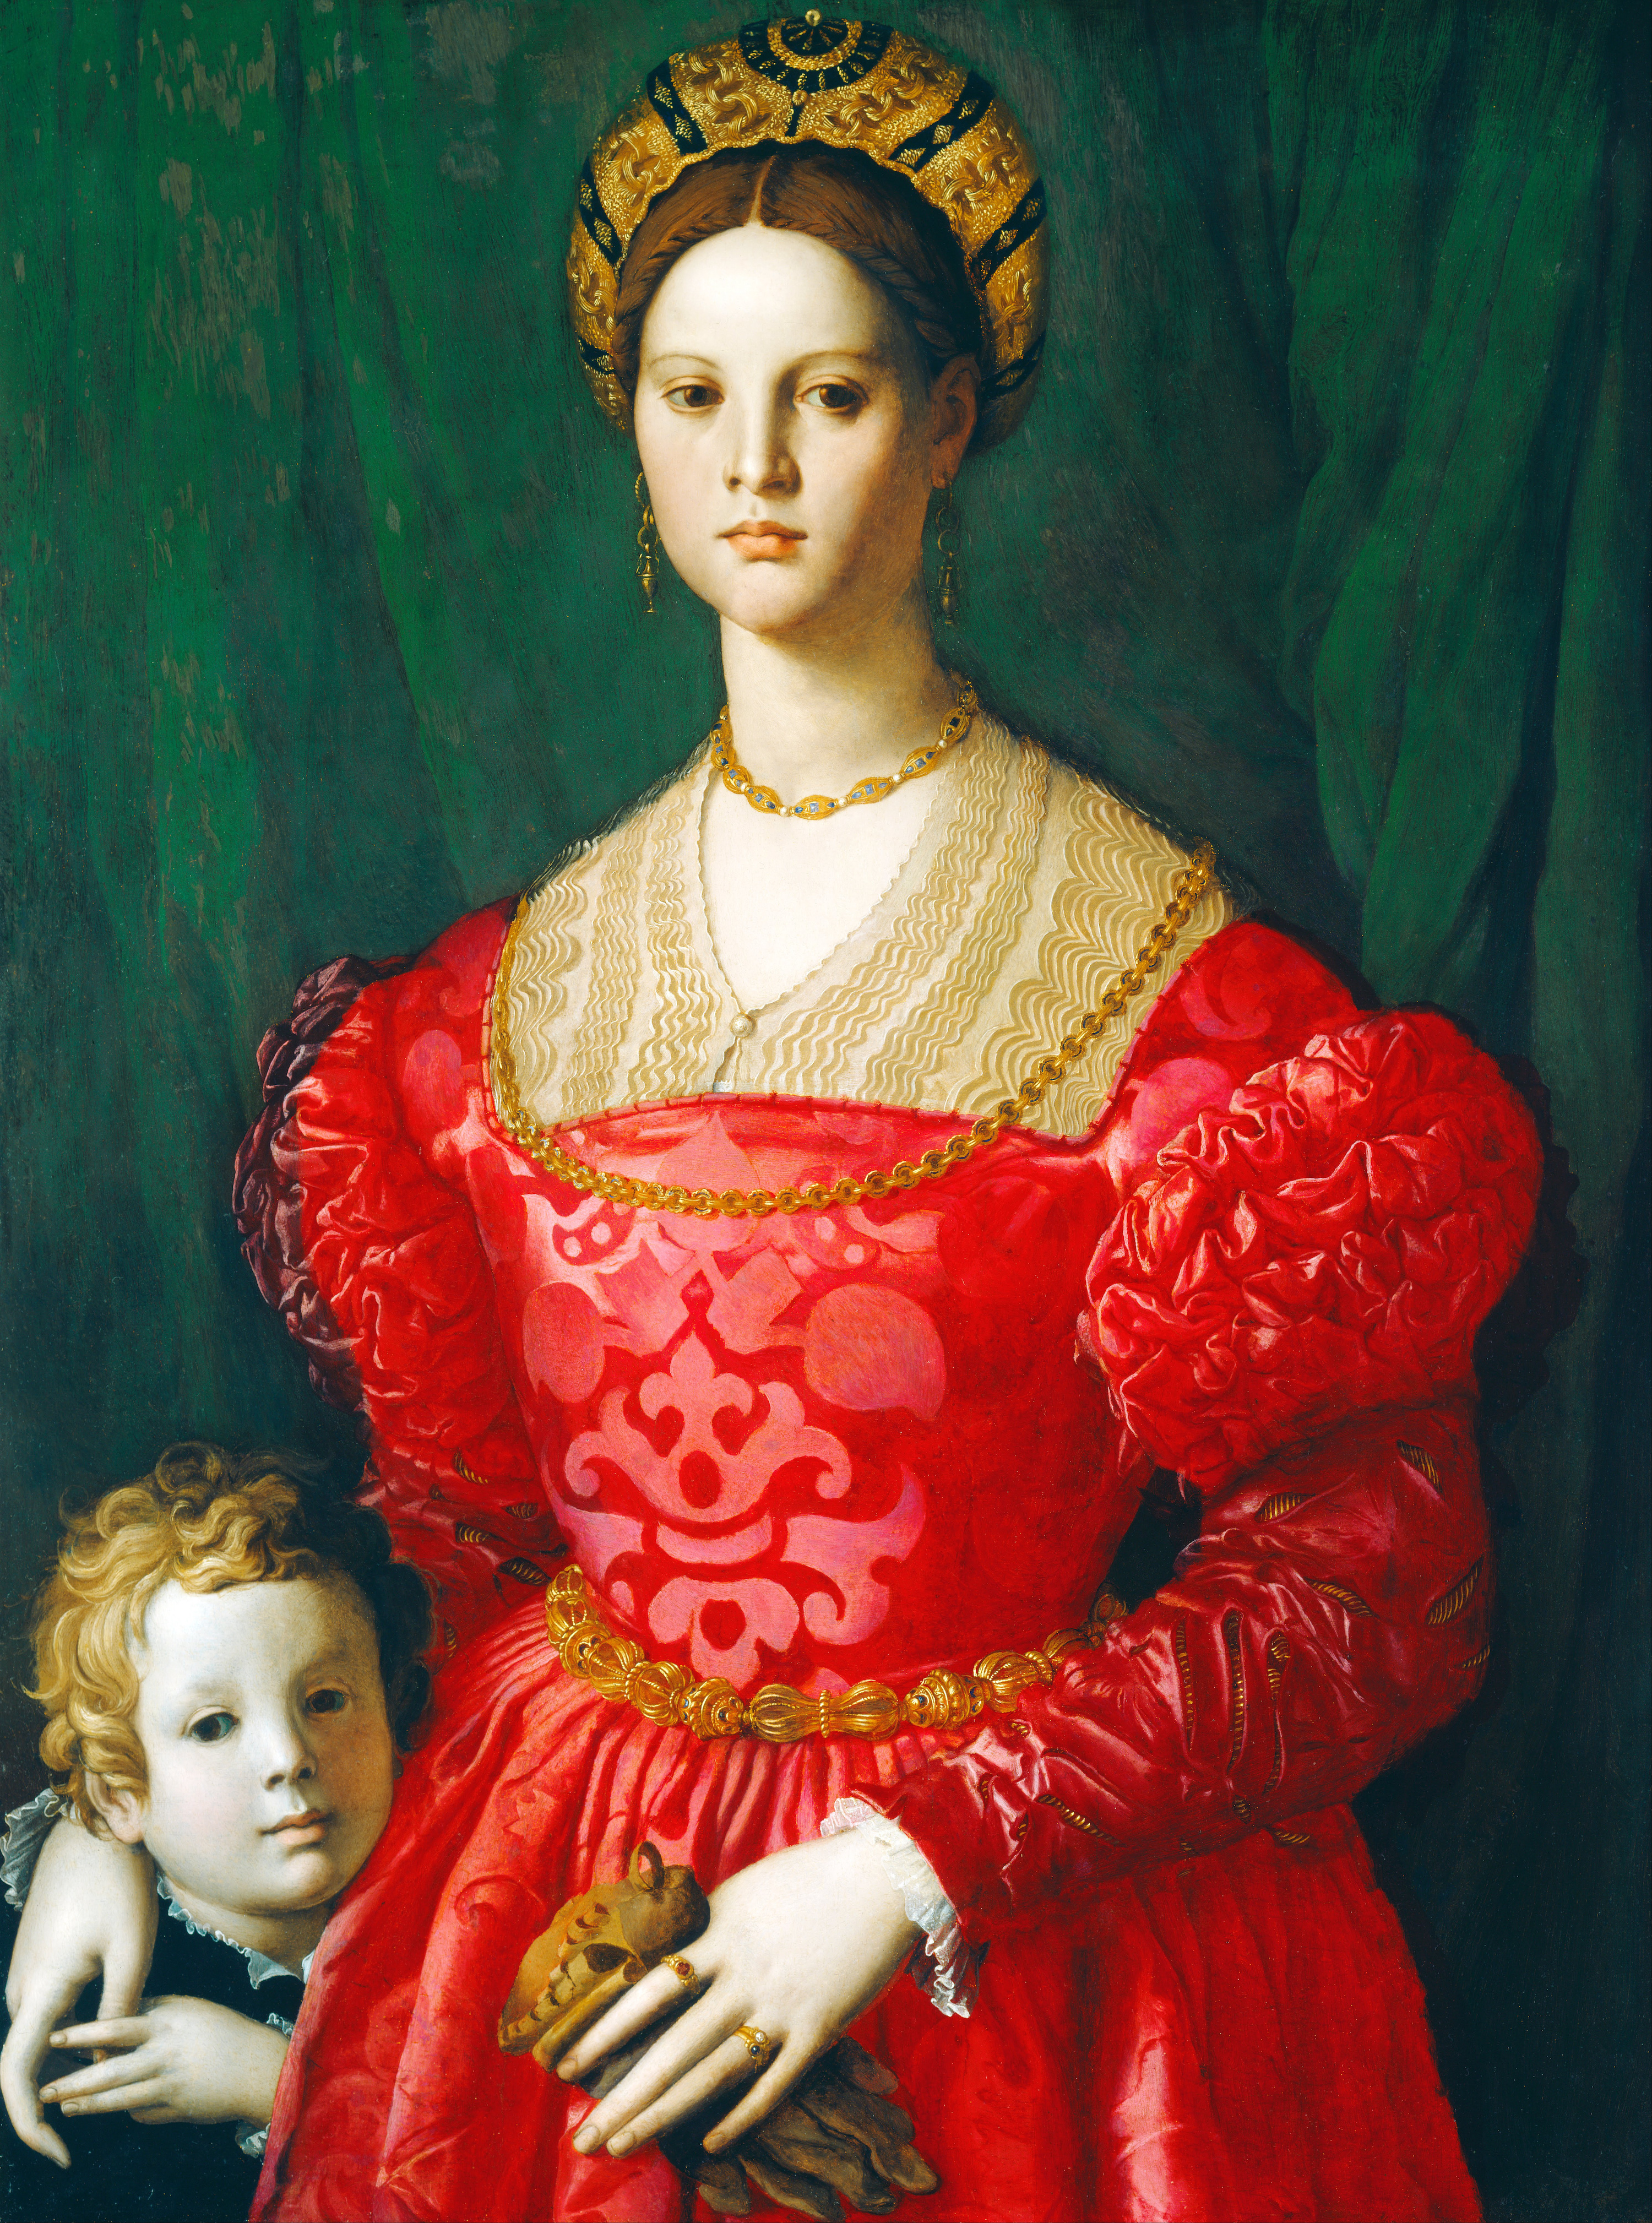 A Young Woman and Her Little Boy by Agnolo Bronzino - c. 1540 - 76 x 99.5 cm National Gallery of Art